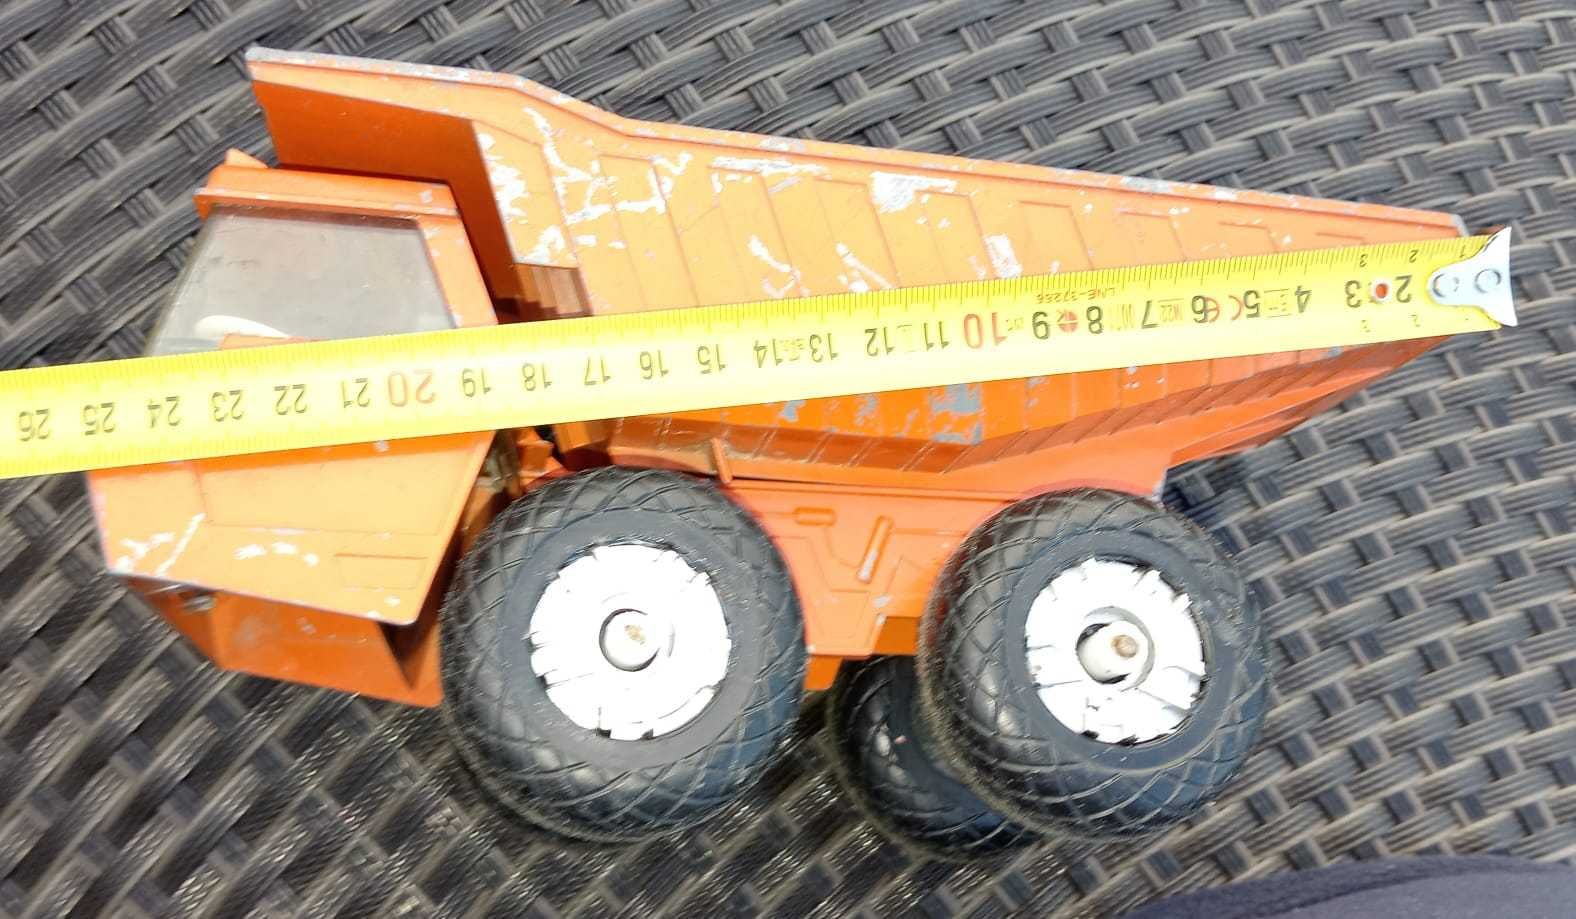 Jucarie metal camion IDEAL BULL vintage mare 25/10 cm toy colectionari